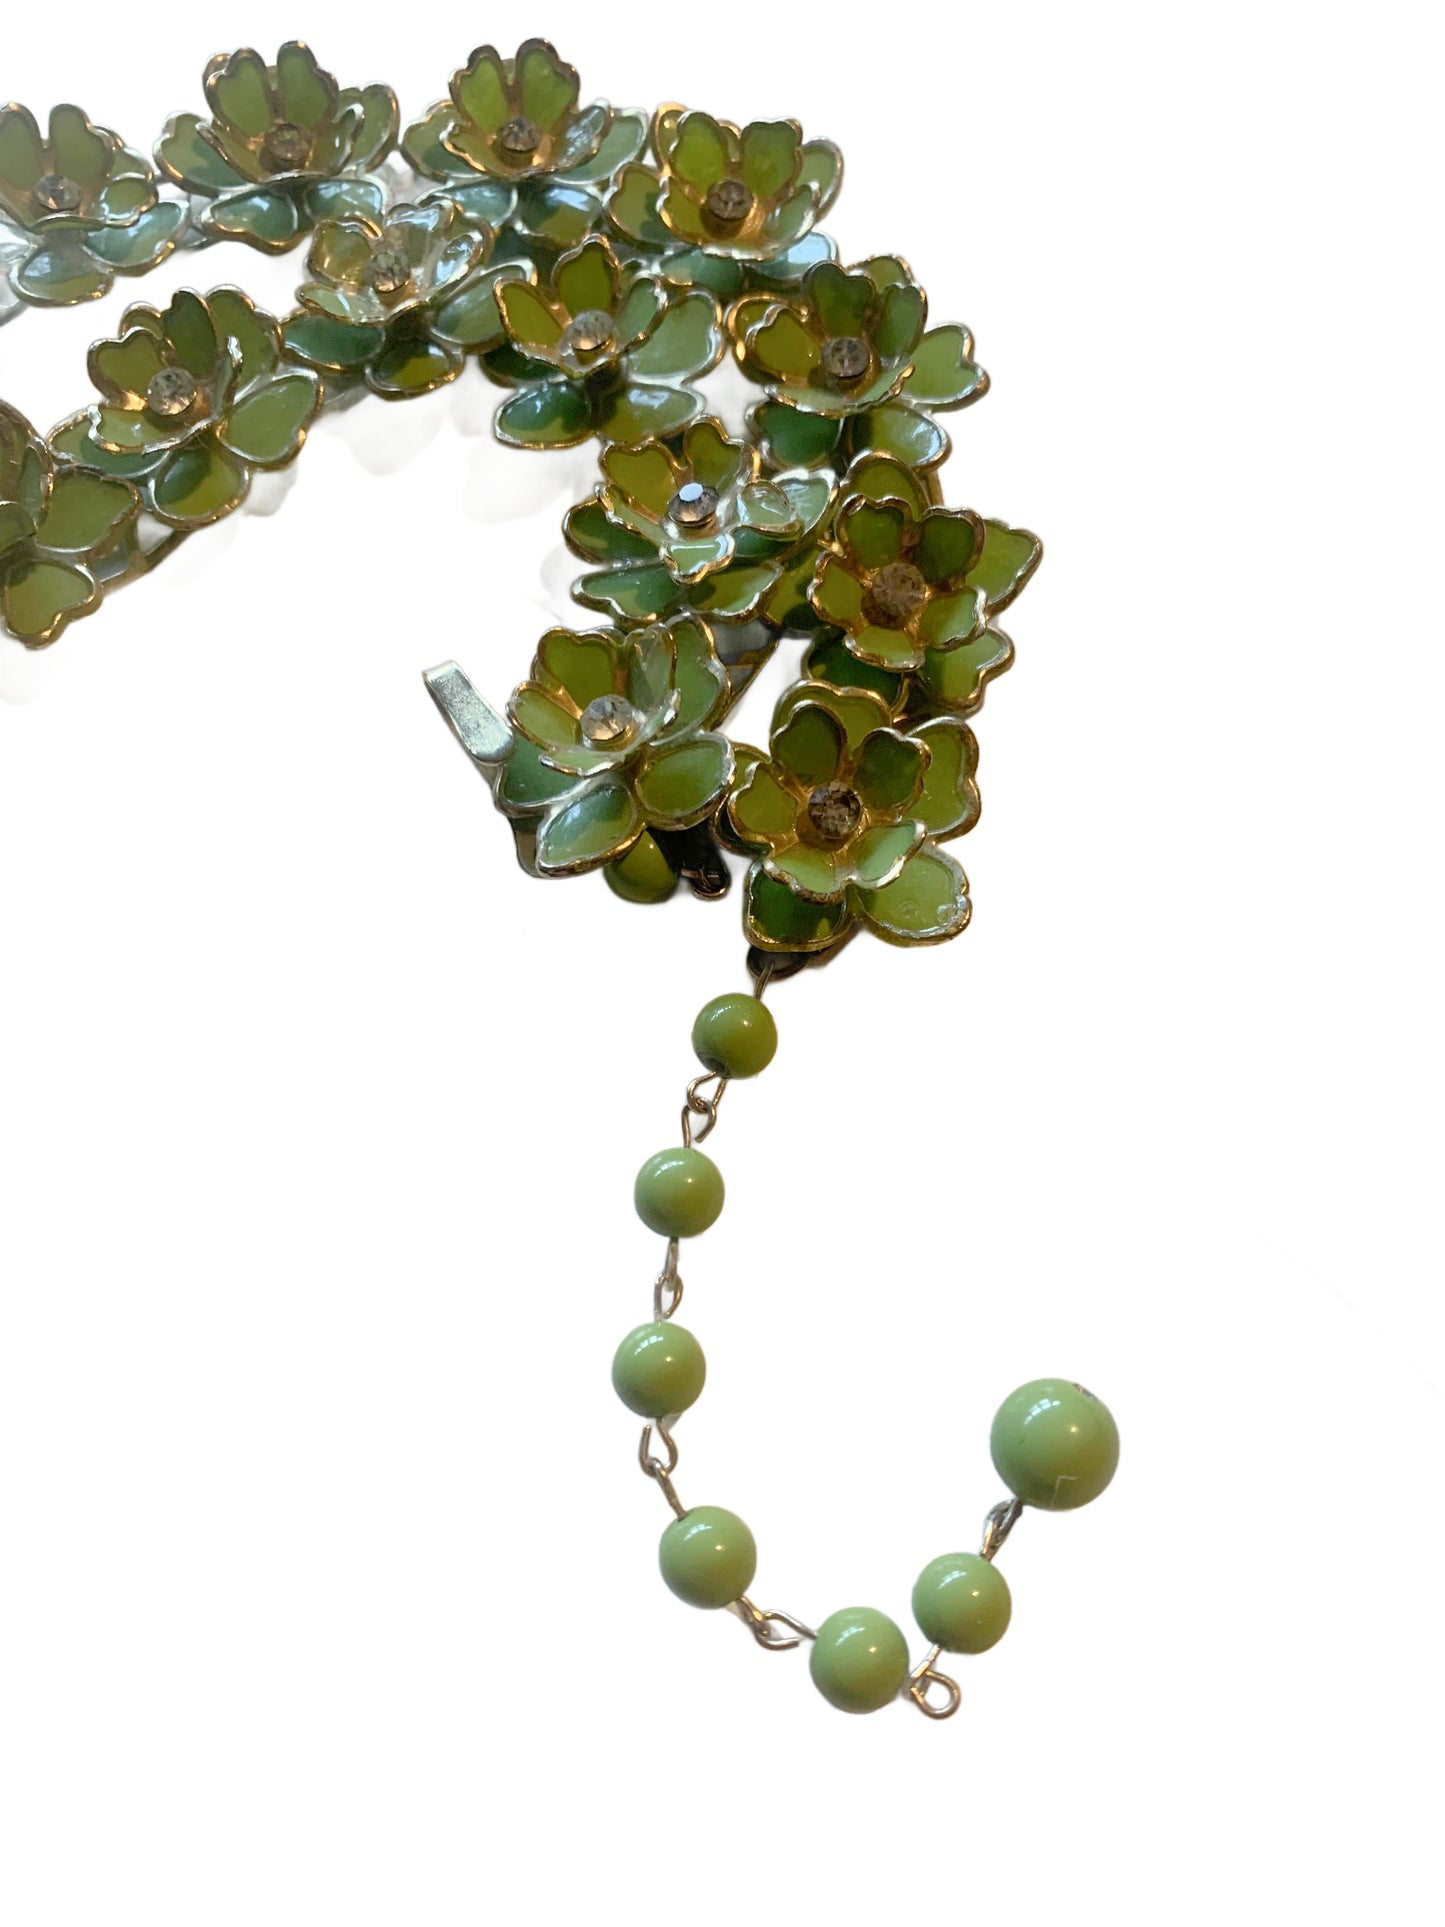 Chartreuse Green Celluloid Flowers Necklace with Rhinestones circa 1930s